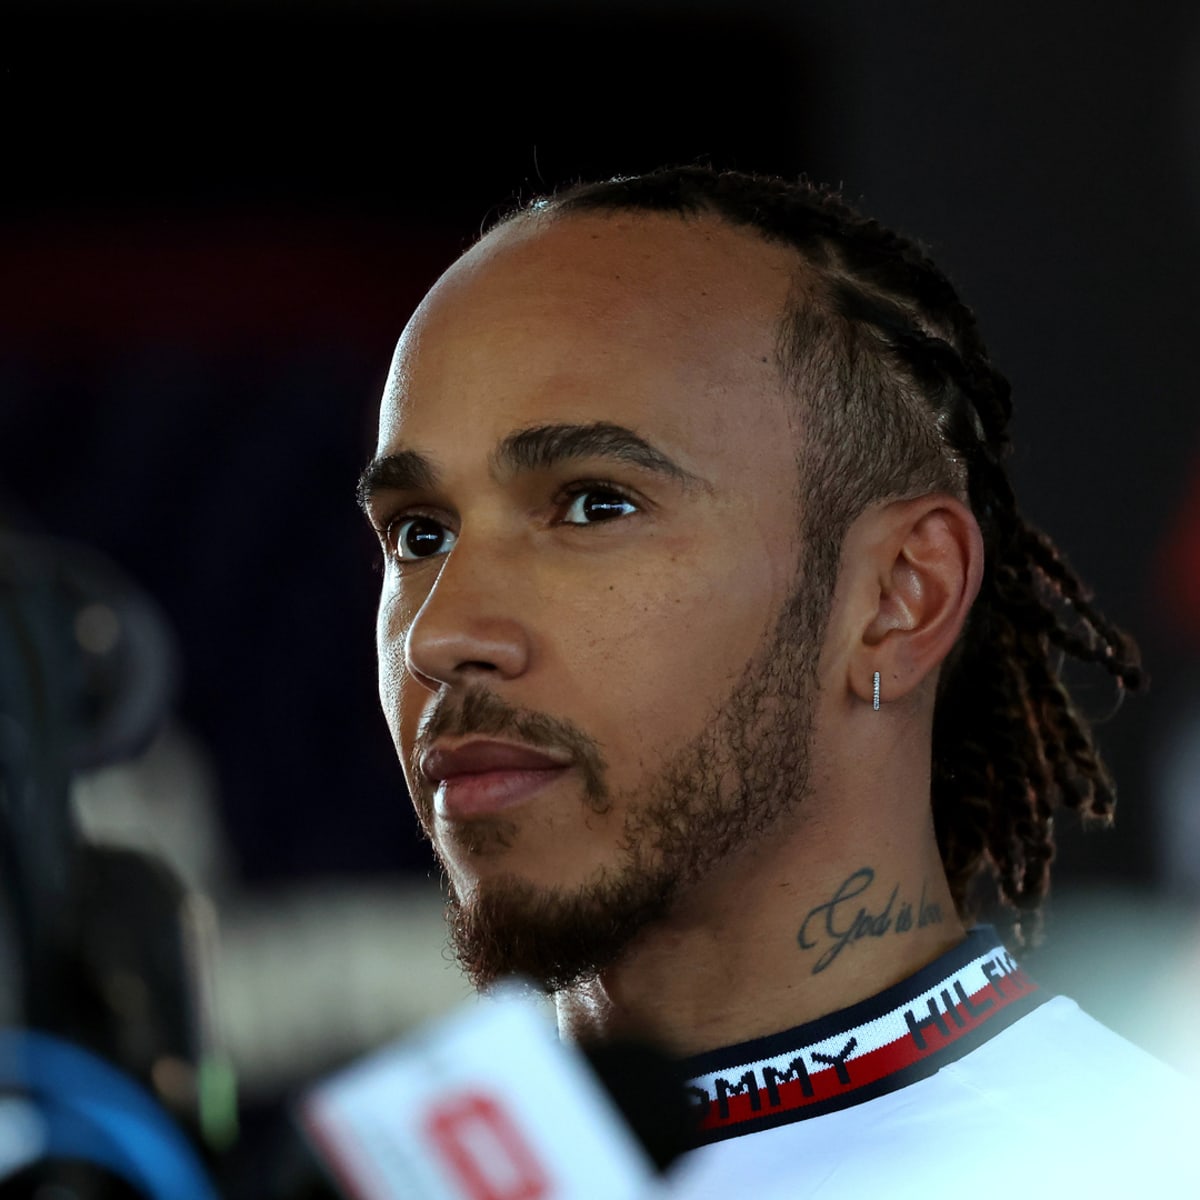 F1 News: Lewis Hamilton Blasts Former Champions Over Claims Of Mercedes  Departure - F1 Briefings: Formula 1 News, Rumors, Standings and More